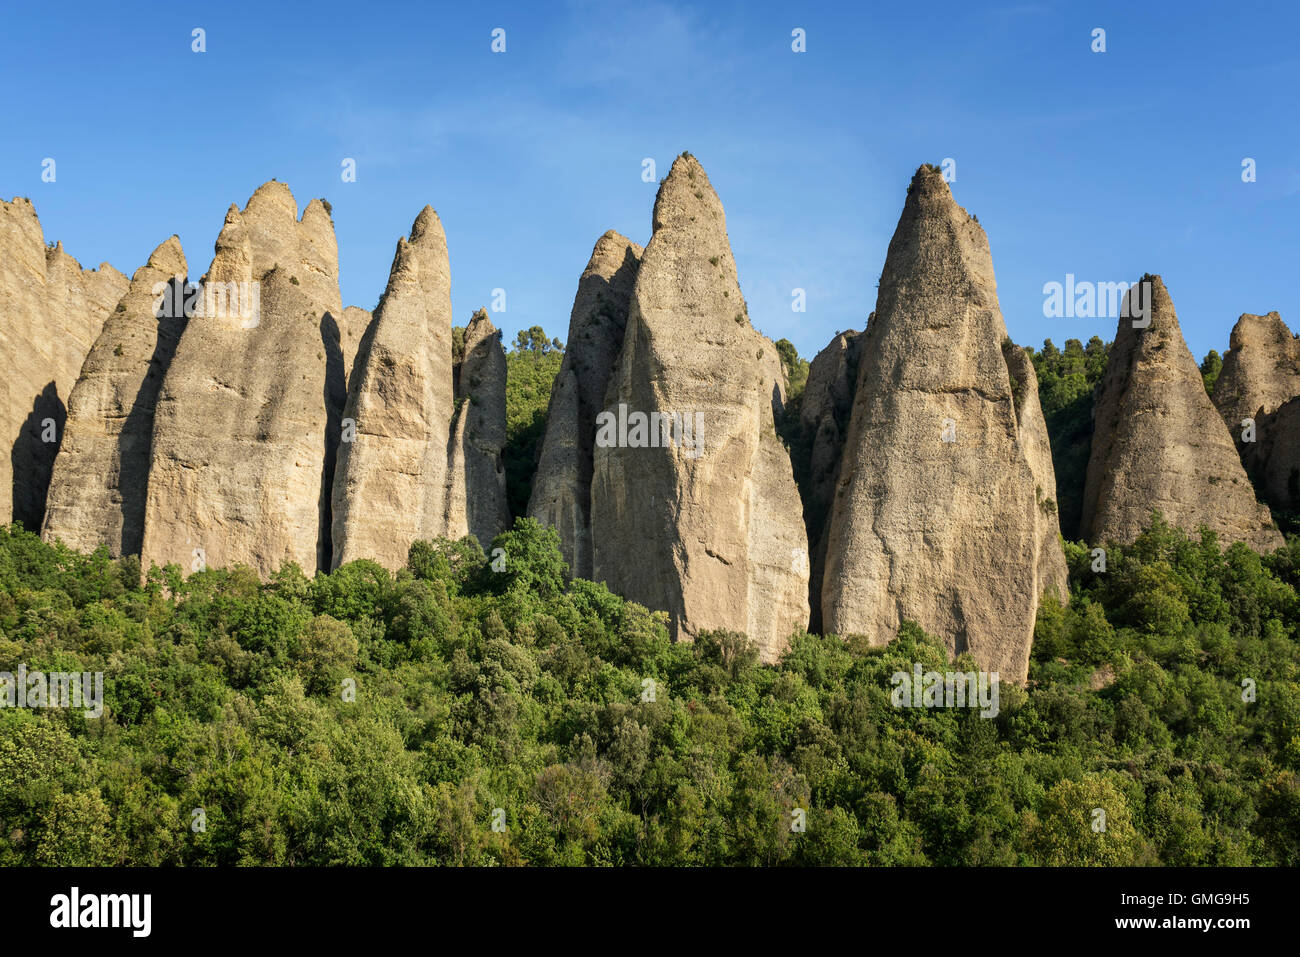 The Penitents des Mees, between Forcalquier, Sisteron and Digne, Alpes-de-Haute-Provence, France Stock Photo